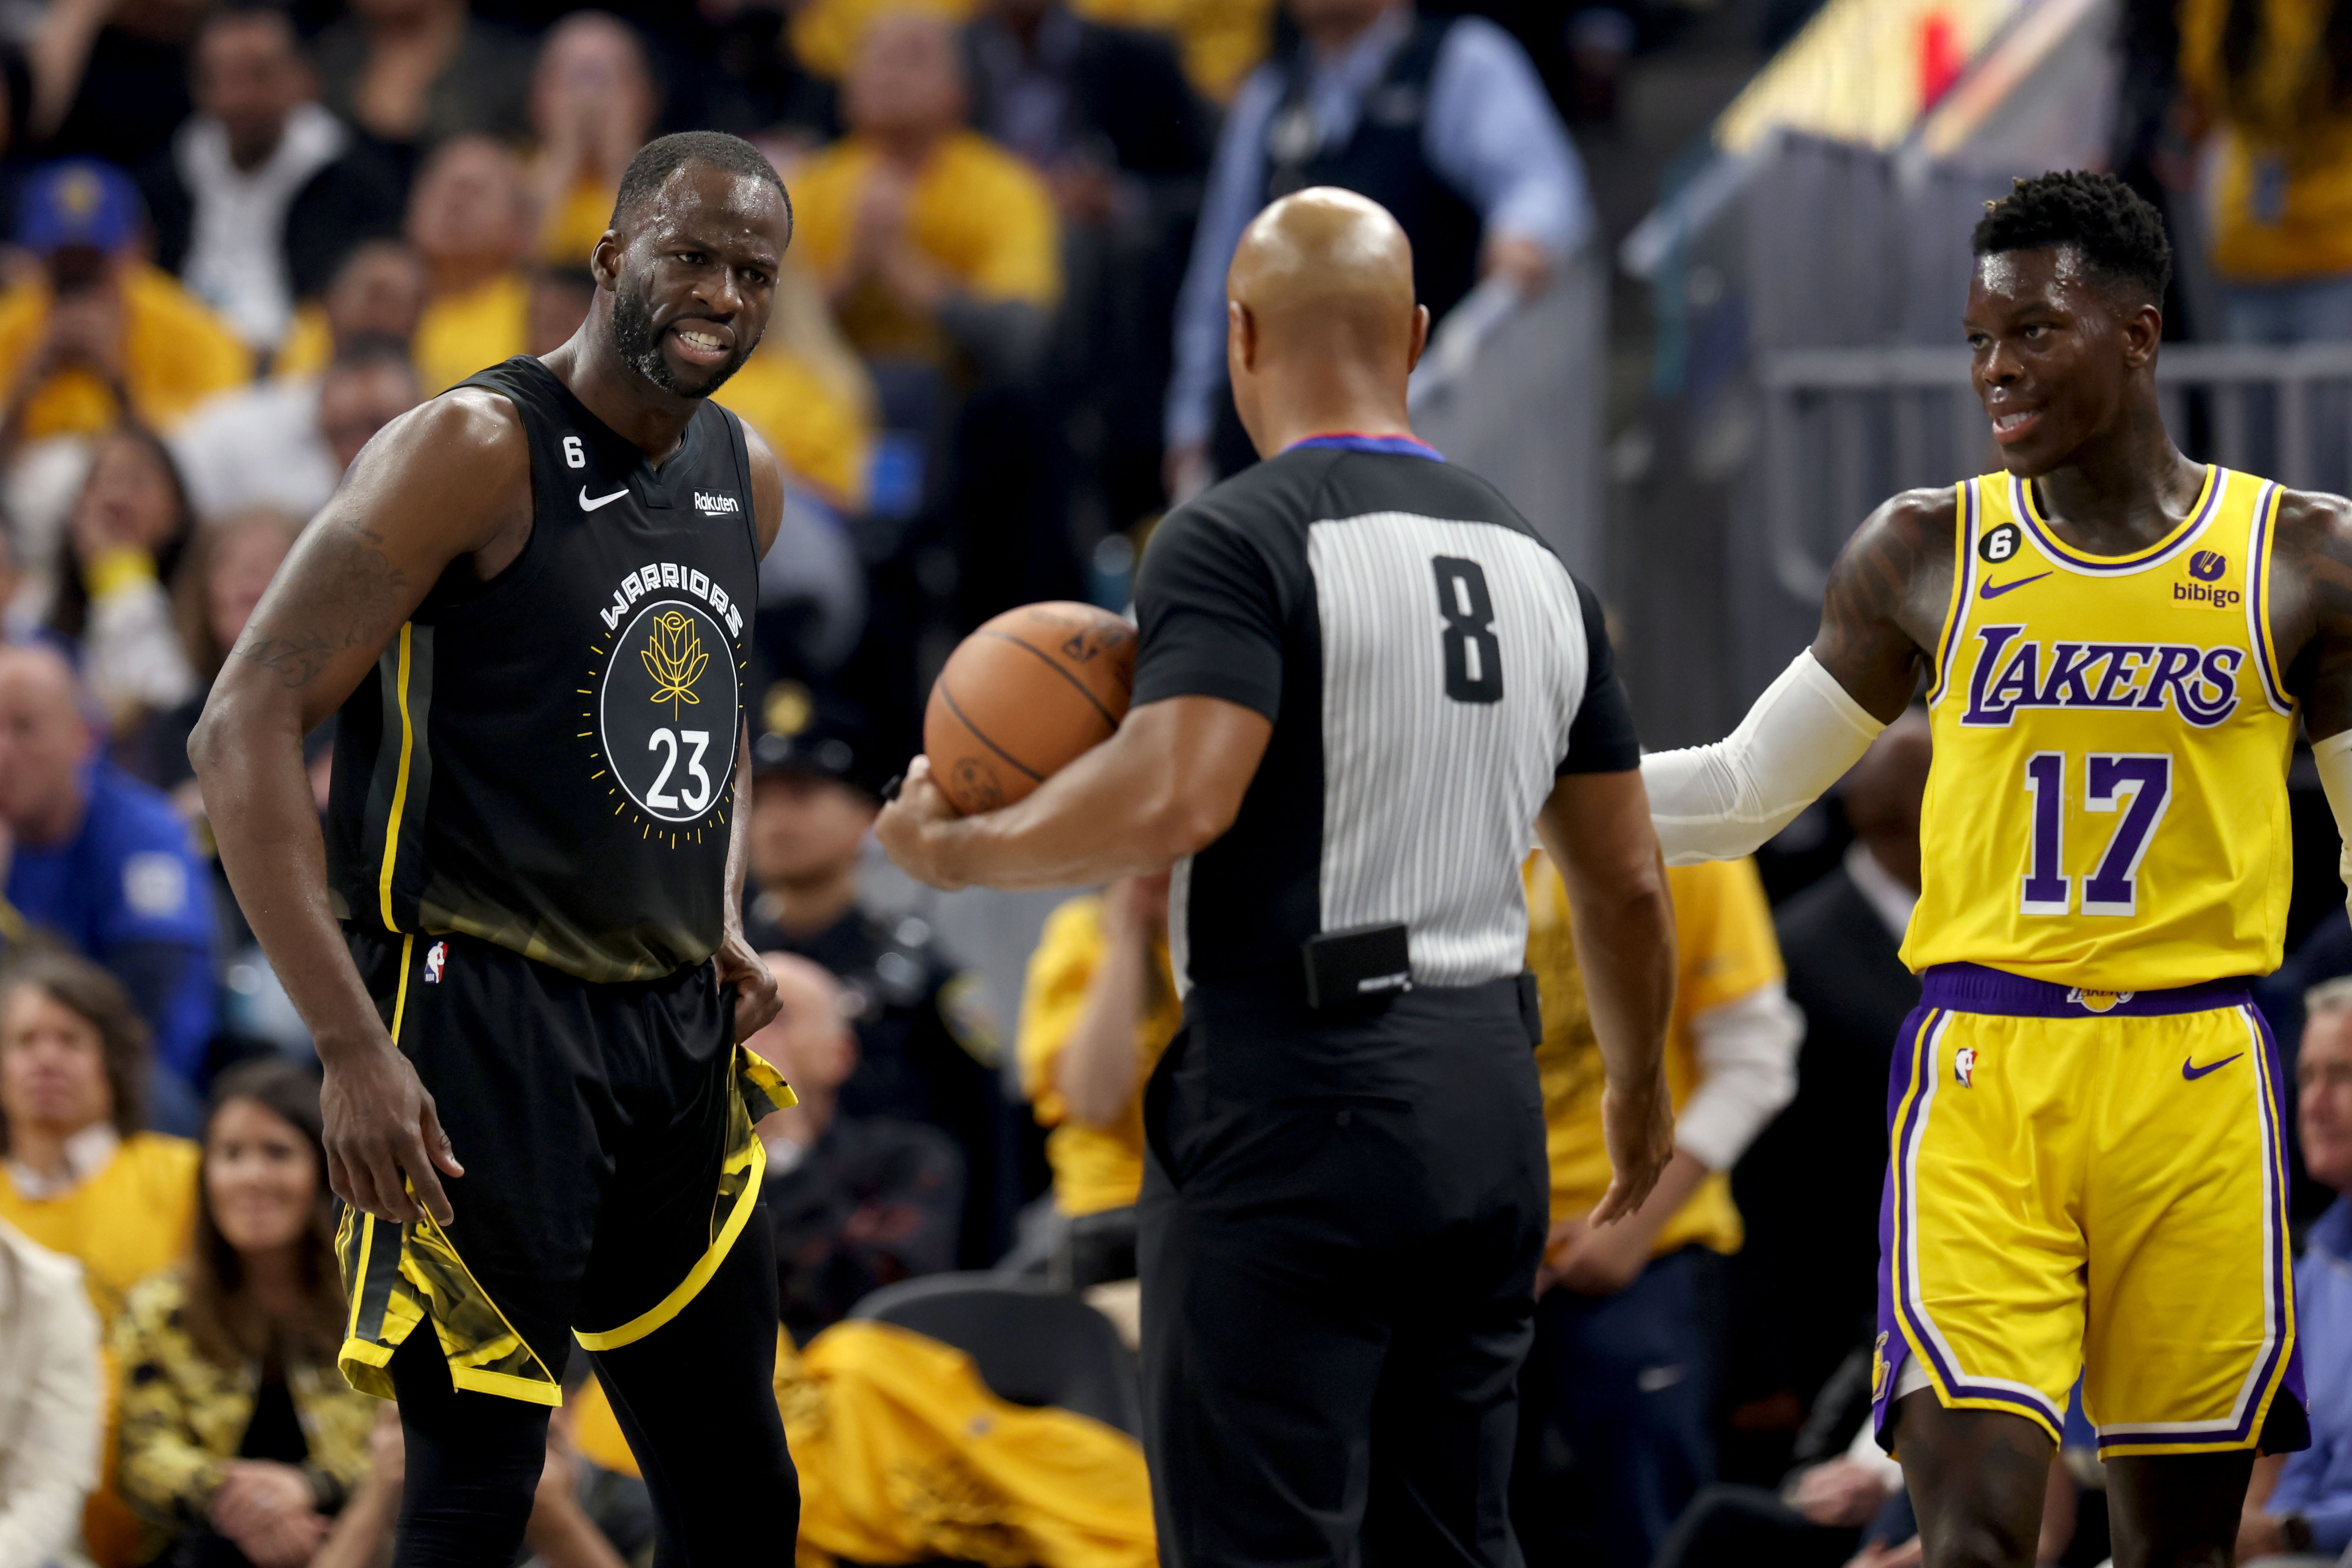 Los Angeles Lakers at Golden State Warriors in Game 1 of the NBA Western Conference semifinals